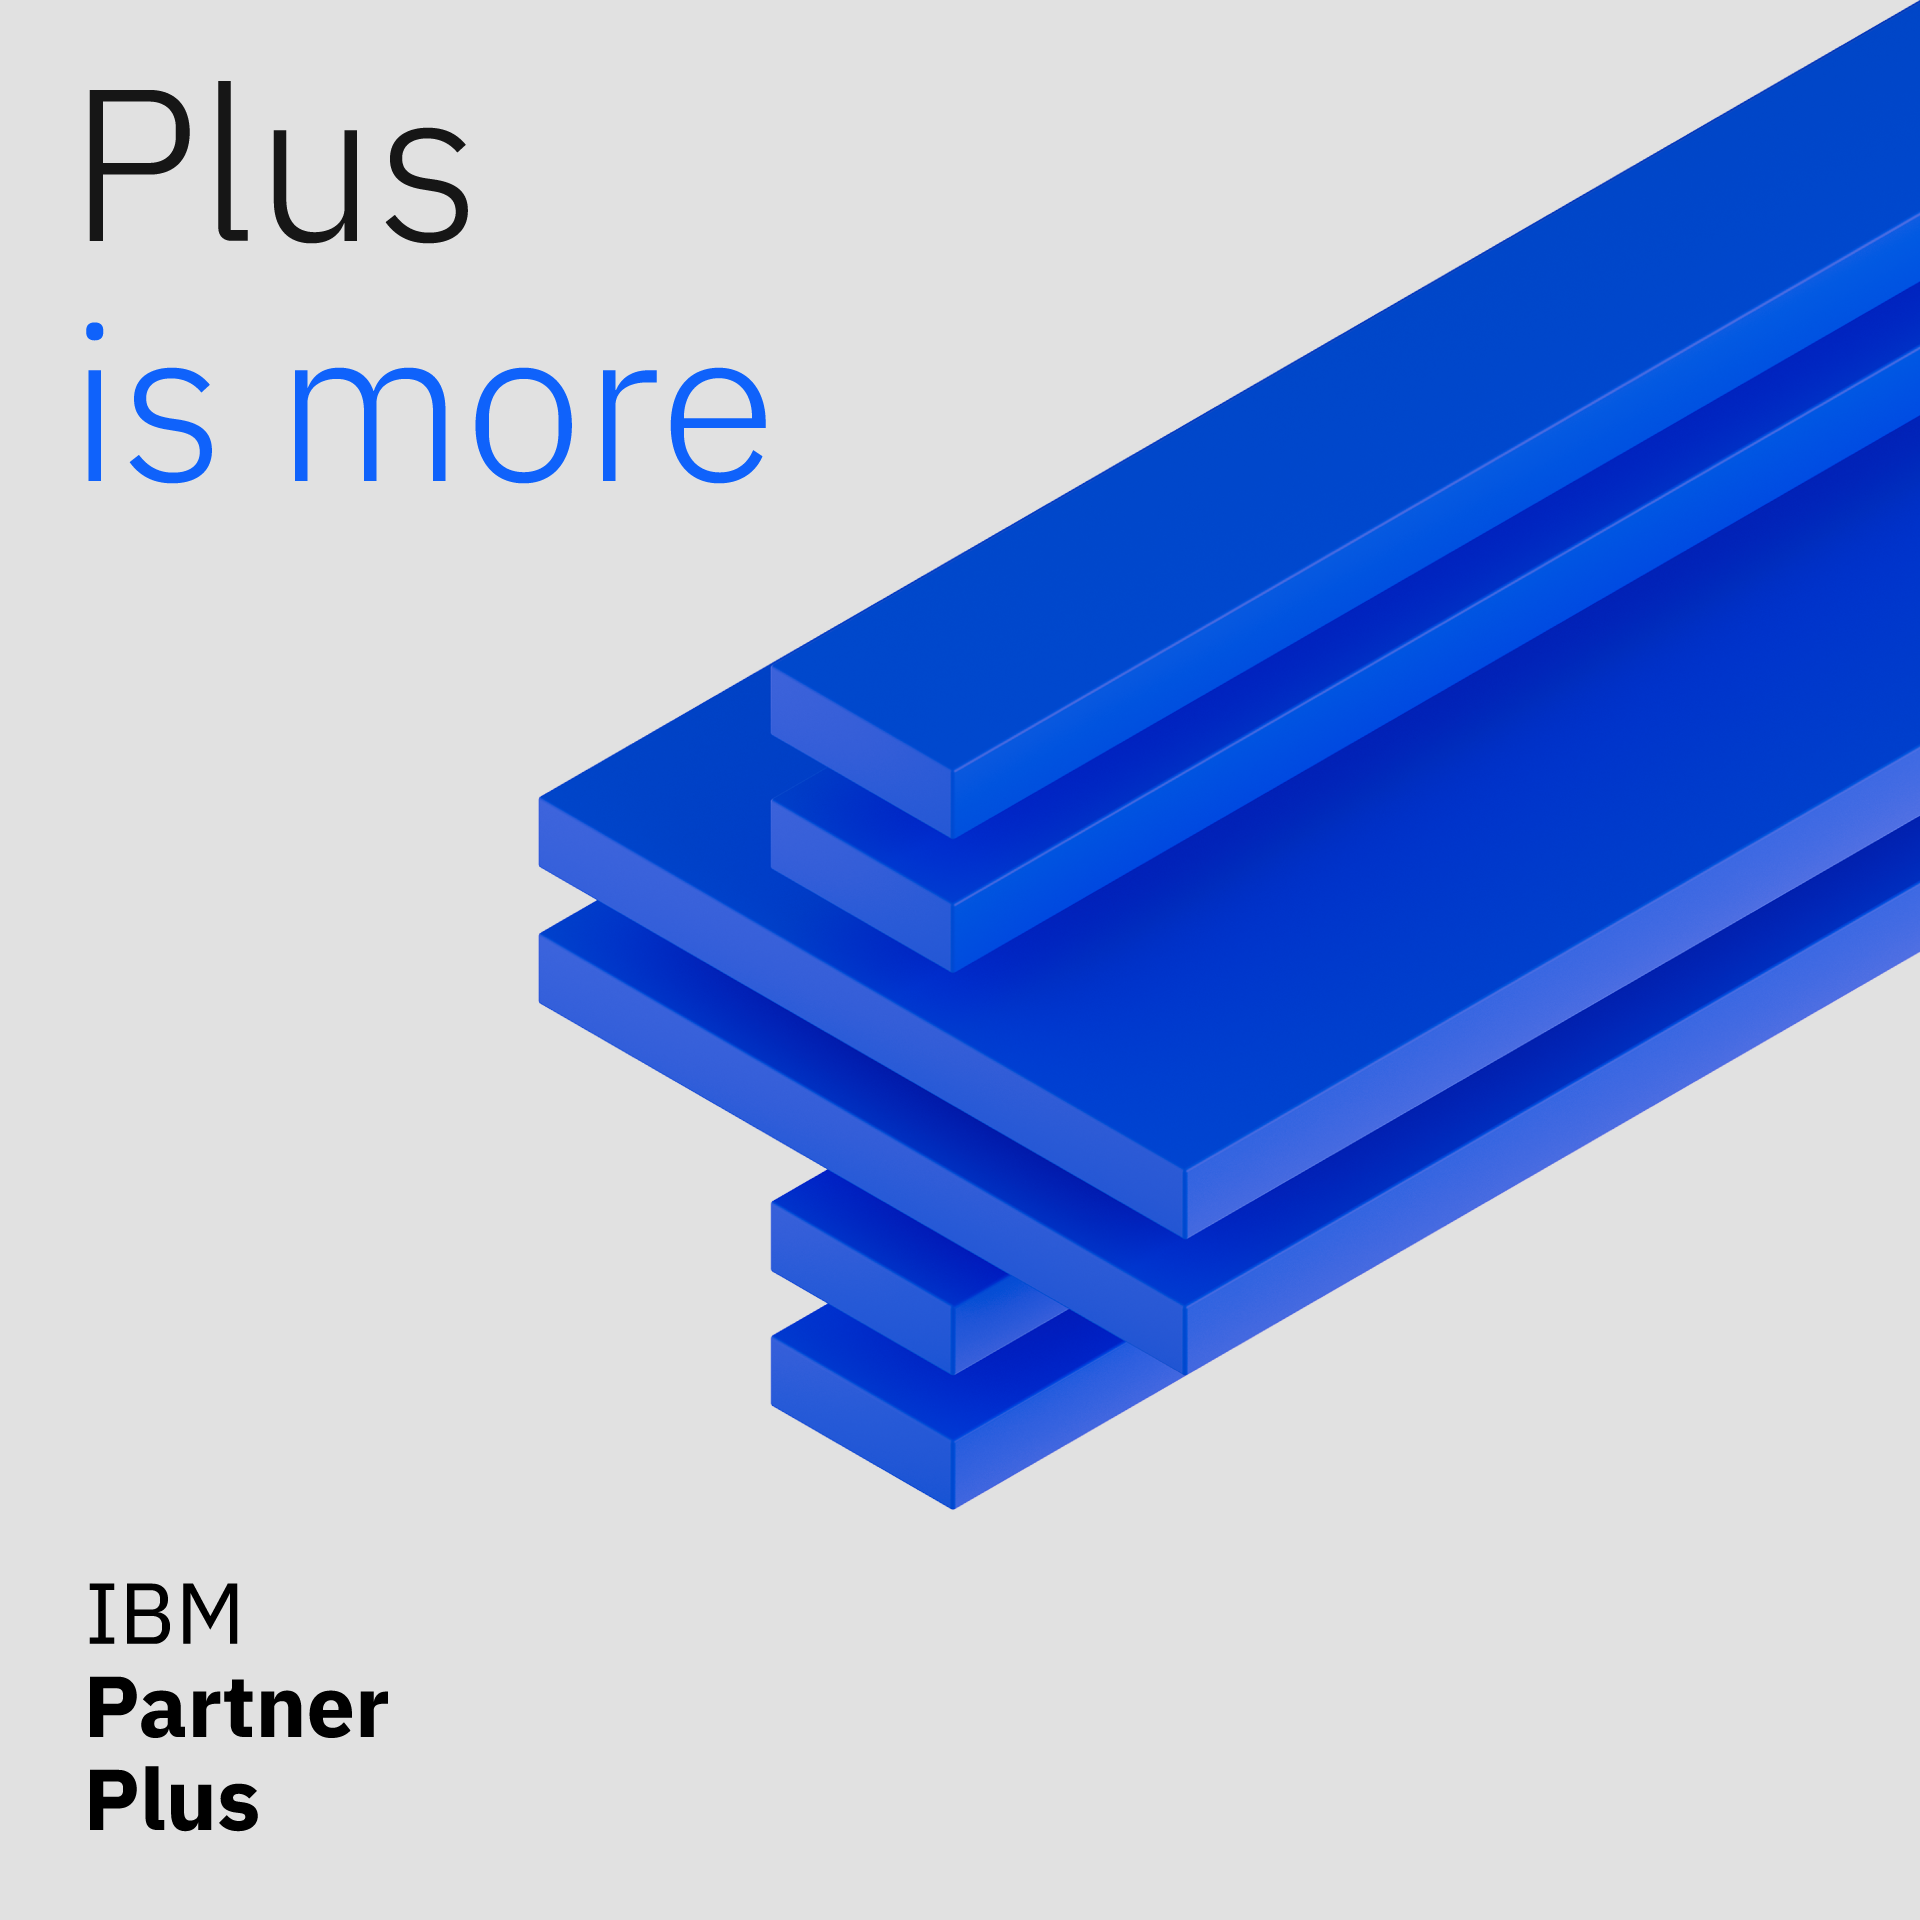 IBM Partner Plus offers partners a transparent, simple, and modern experience